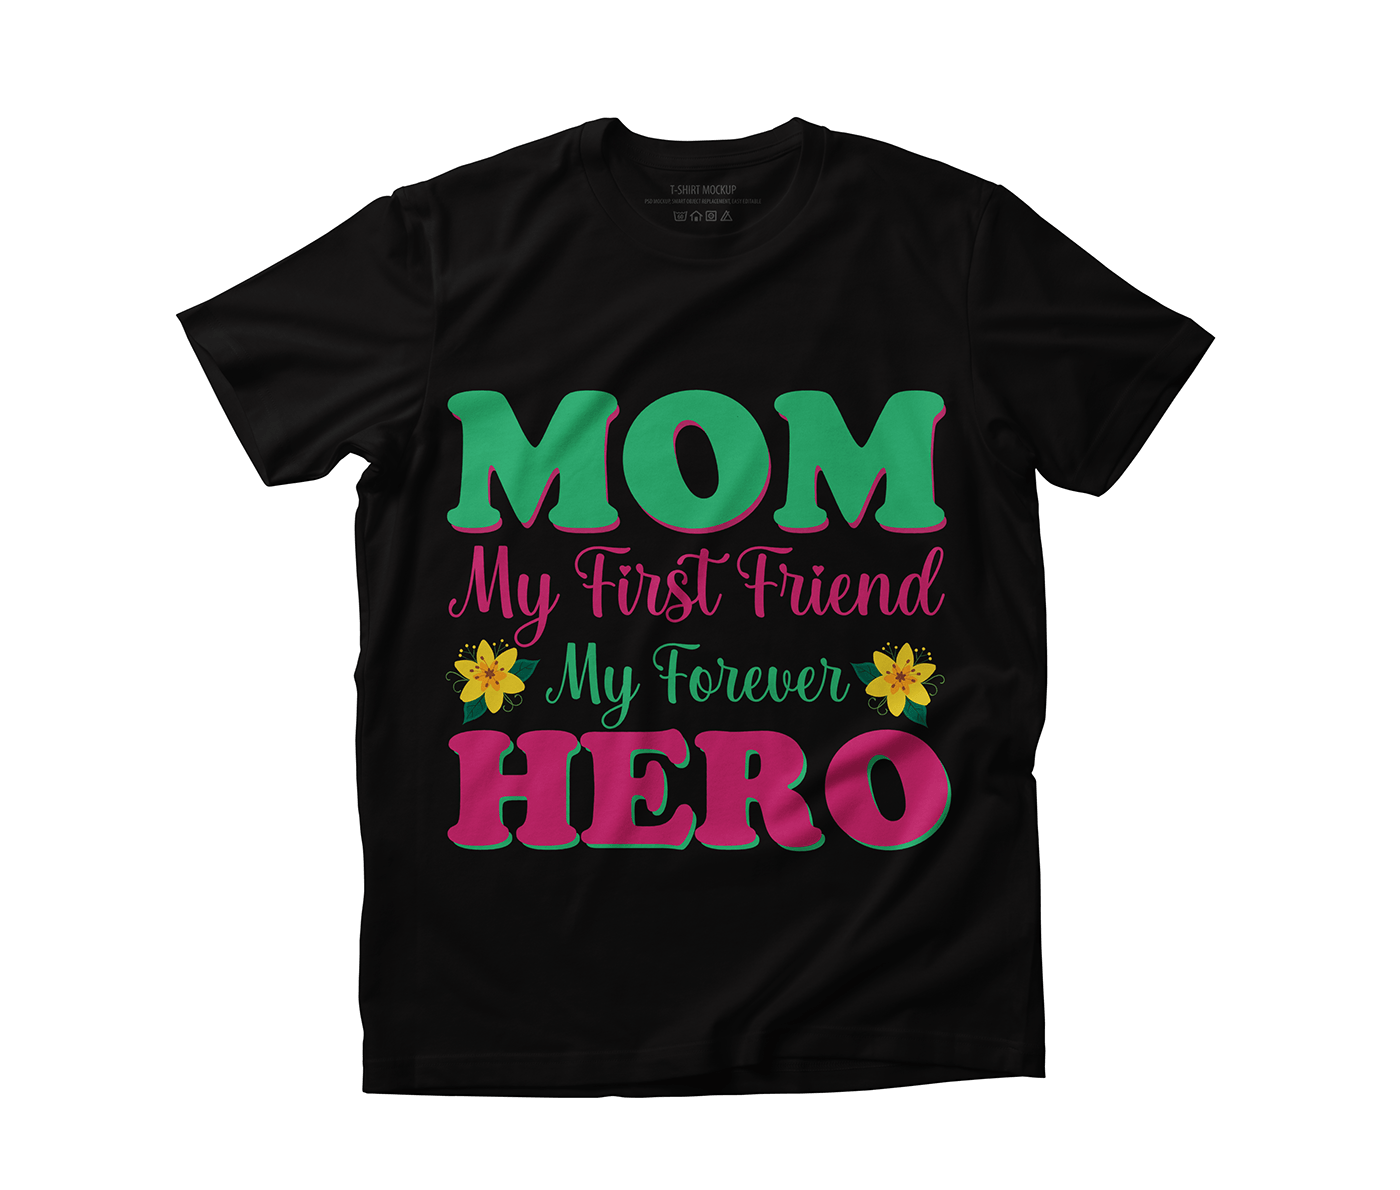 design mom mom t-shirt design mothers day happy Love heart moments moma typography  